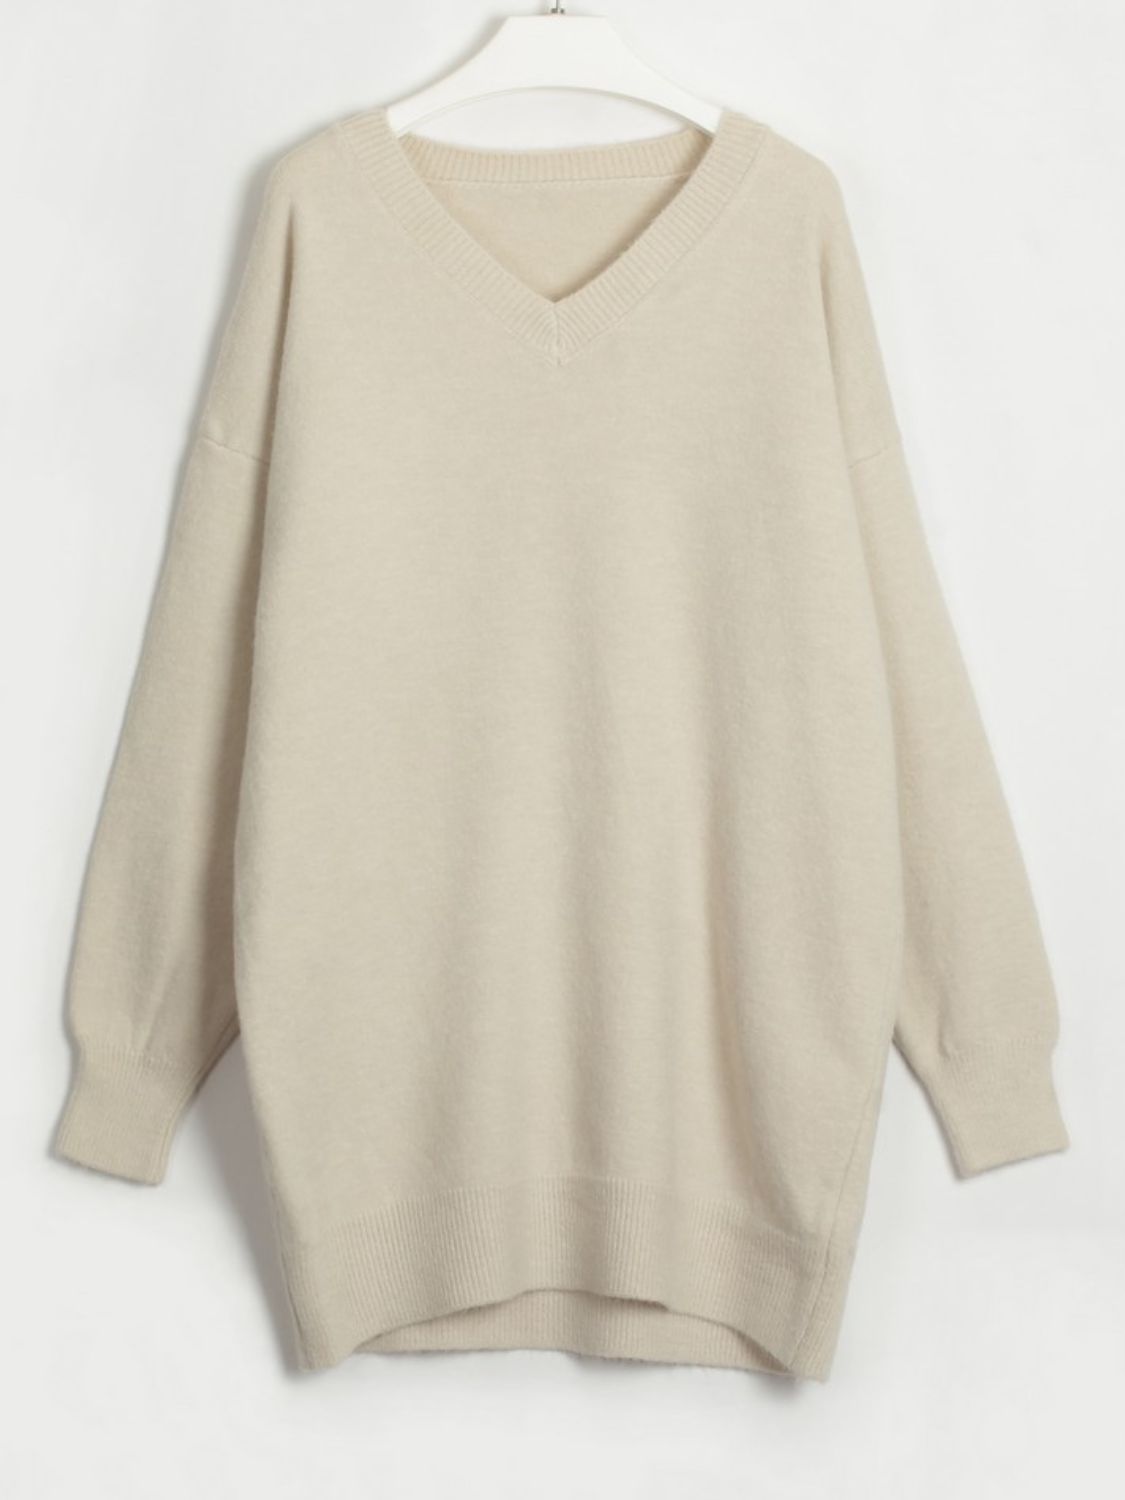 POSHOOT AUTUMN OUTFITS    V-Neck Dropped Shoulder Sweater Dress